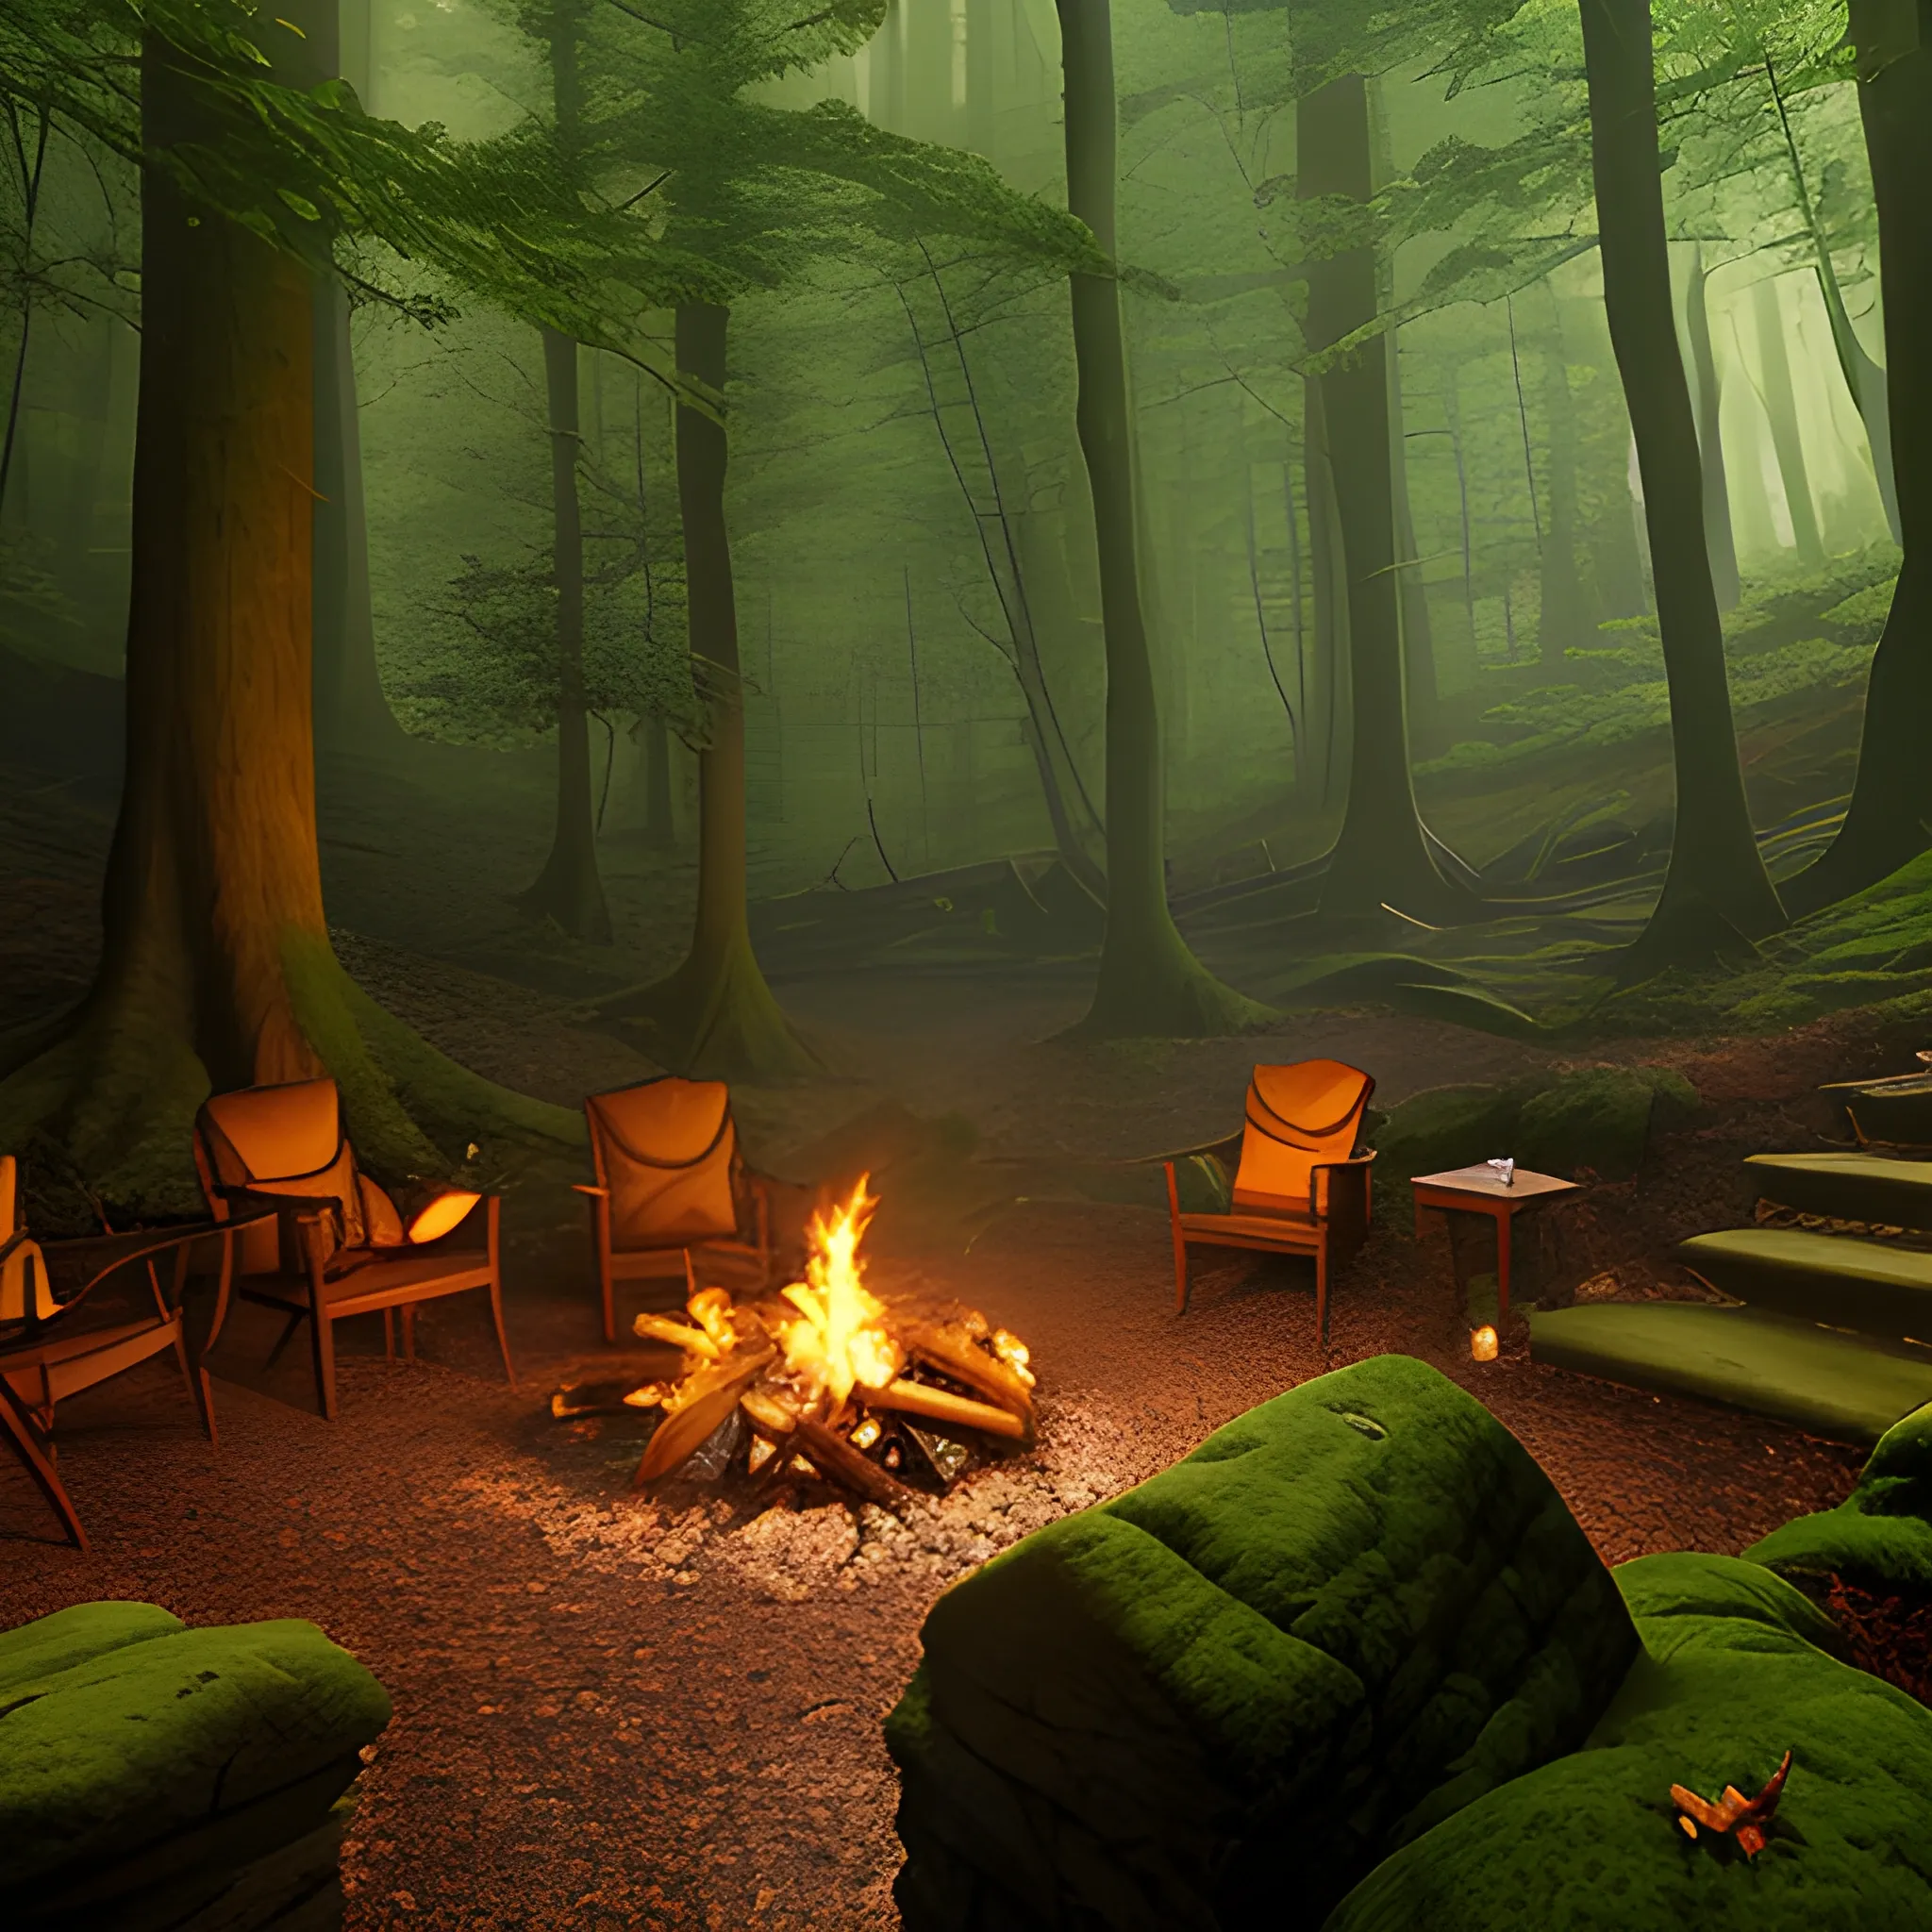 ancient elvish forest with a small campfire in a clearing, a small stream to the side